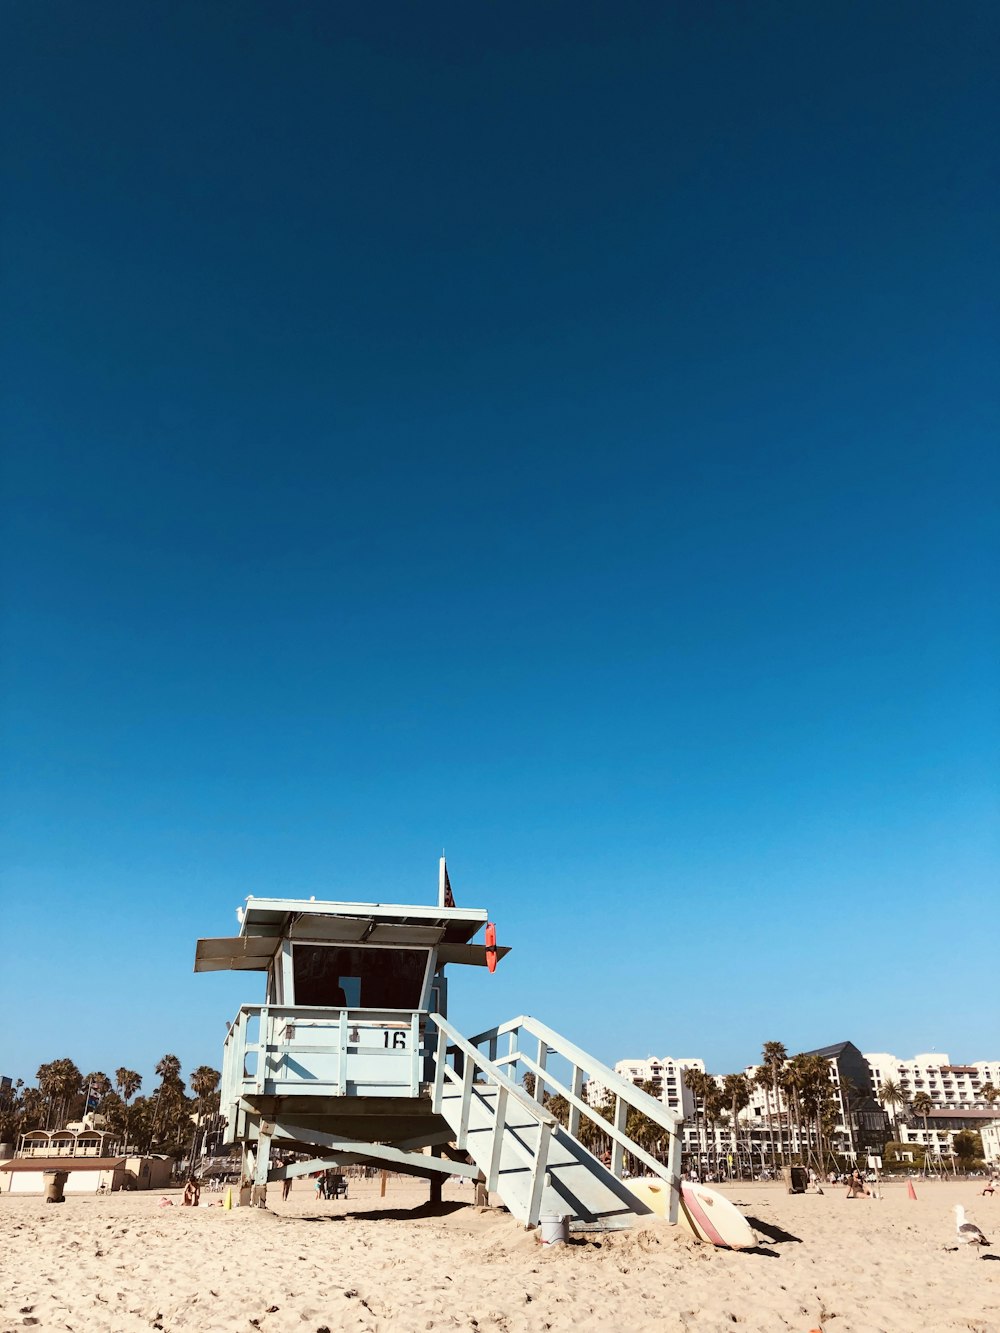 a lifeguard station on a beach with a blue sky in the background